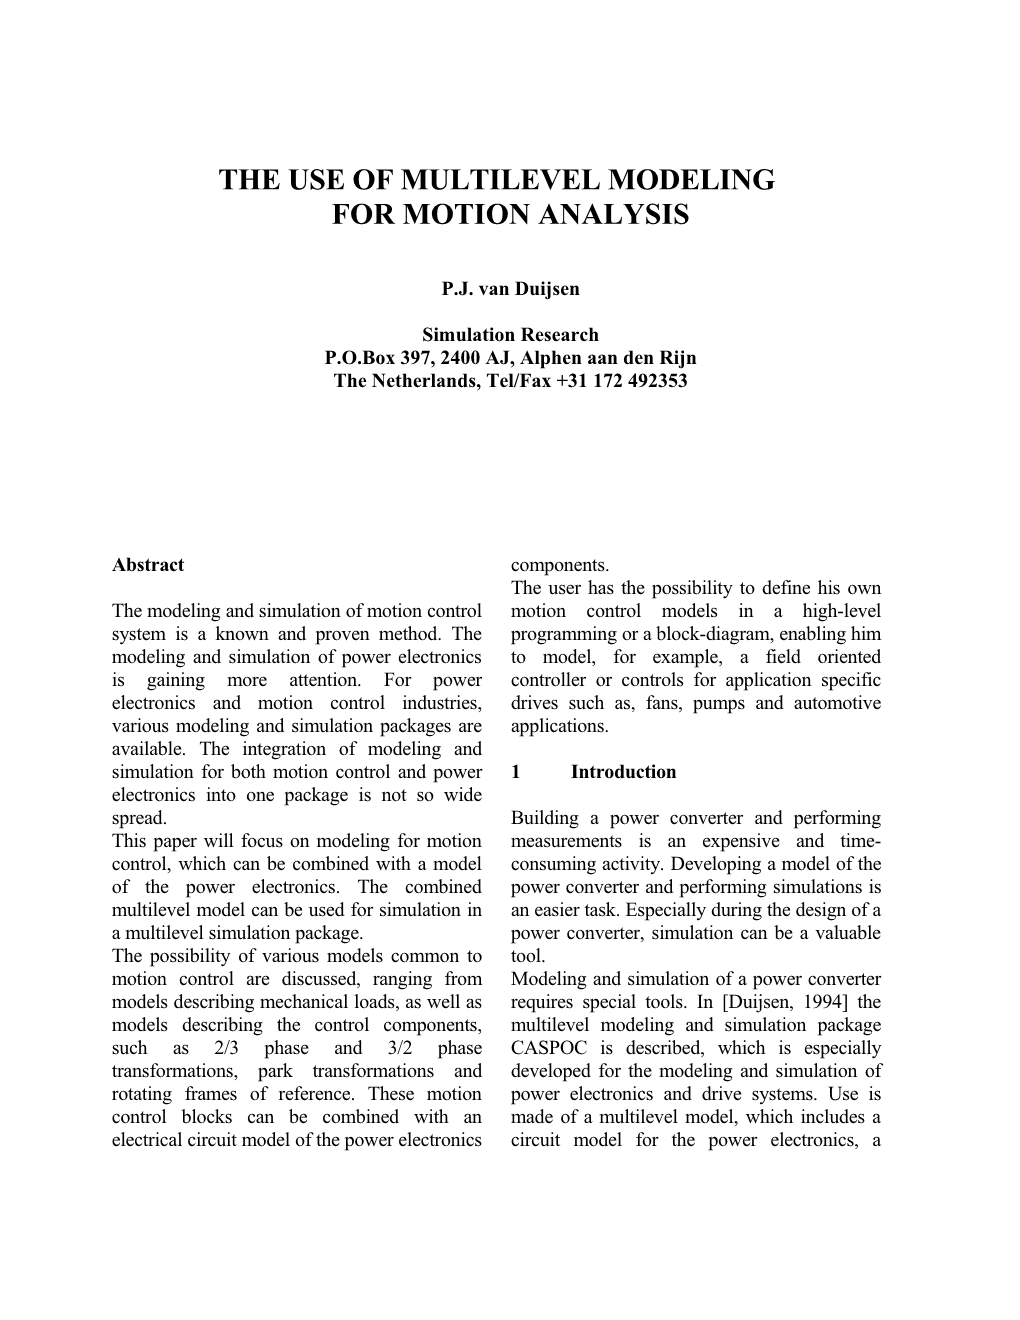 The Use of Multilevel Modeling